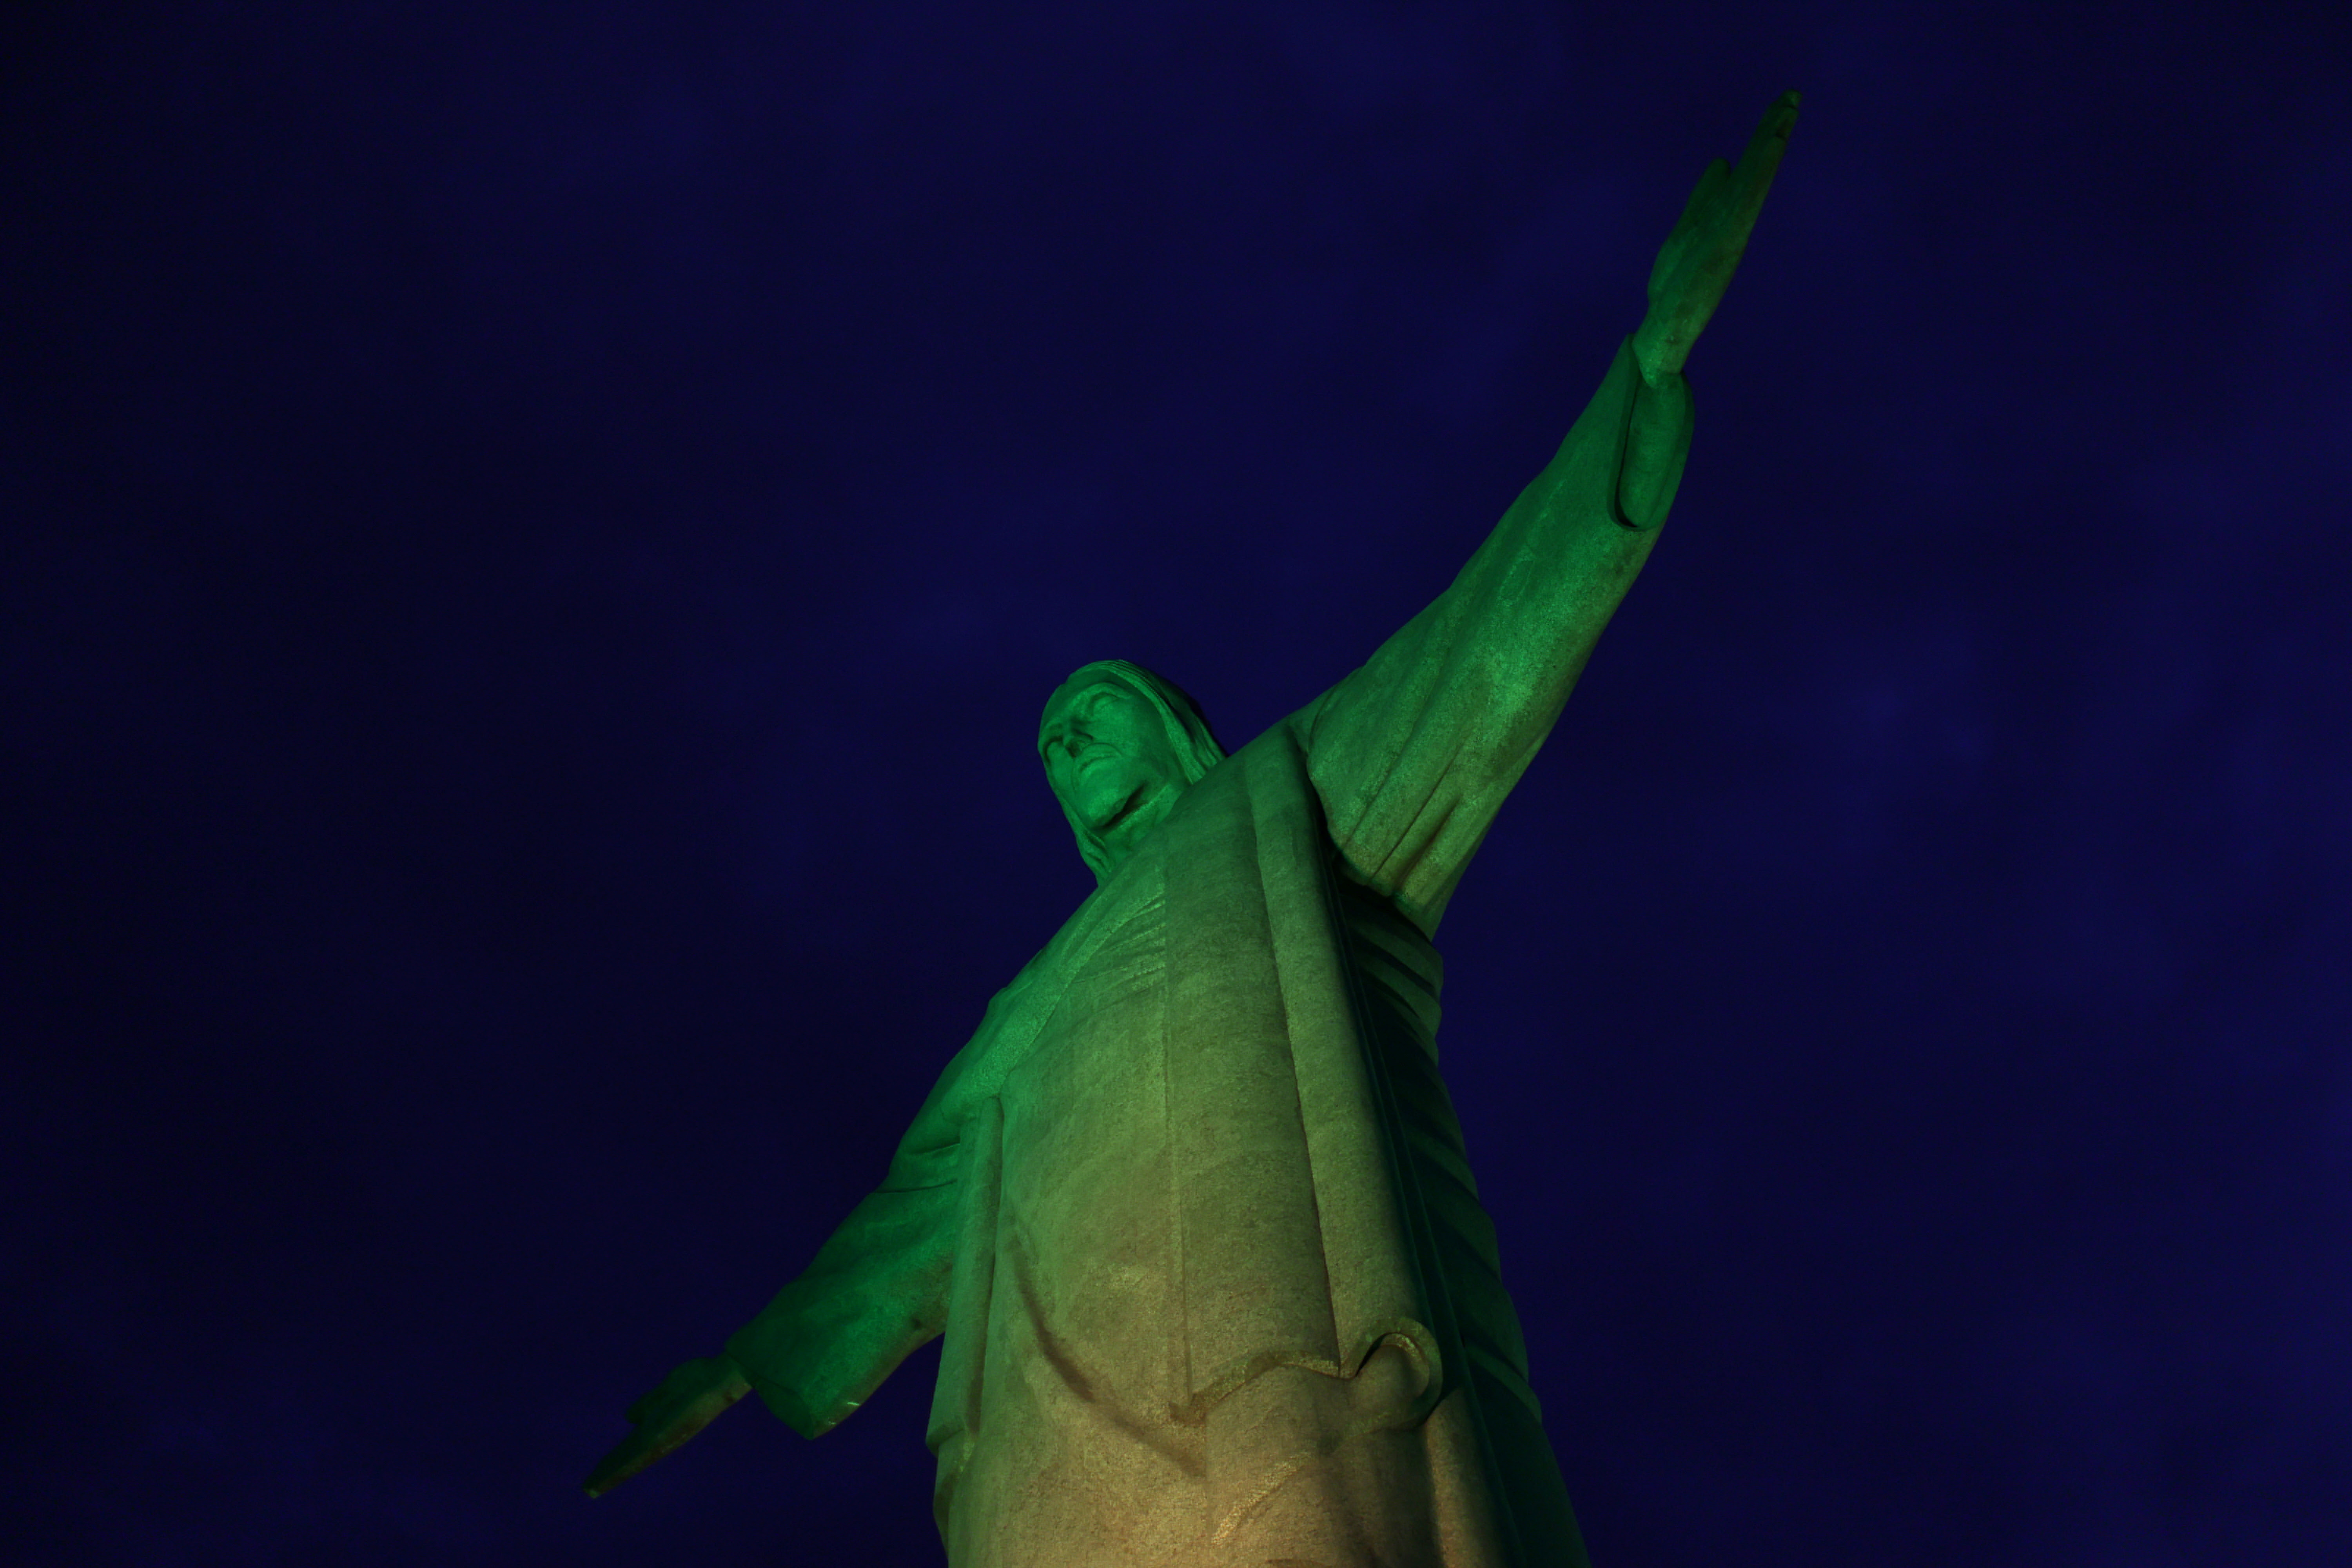 The statue of Christ the Redeemer is lit up with the Brazilian flag colors to celebrate the national soccer team's victory in the FIFA World Cup match against South Korea, in Rio de Janeiro, Brazil December 5, 2022. REUTERS/Pilar Olivares